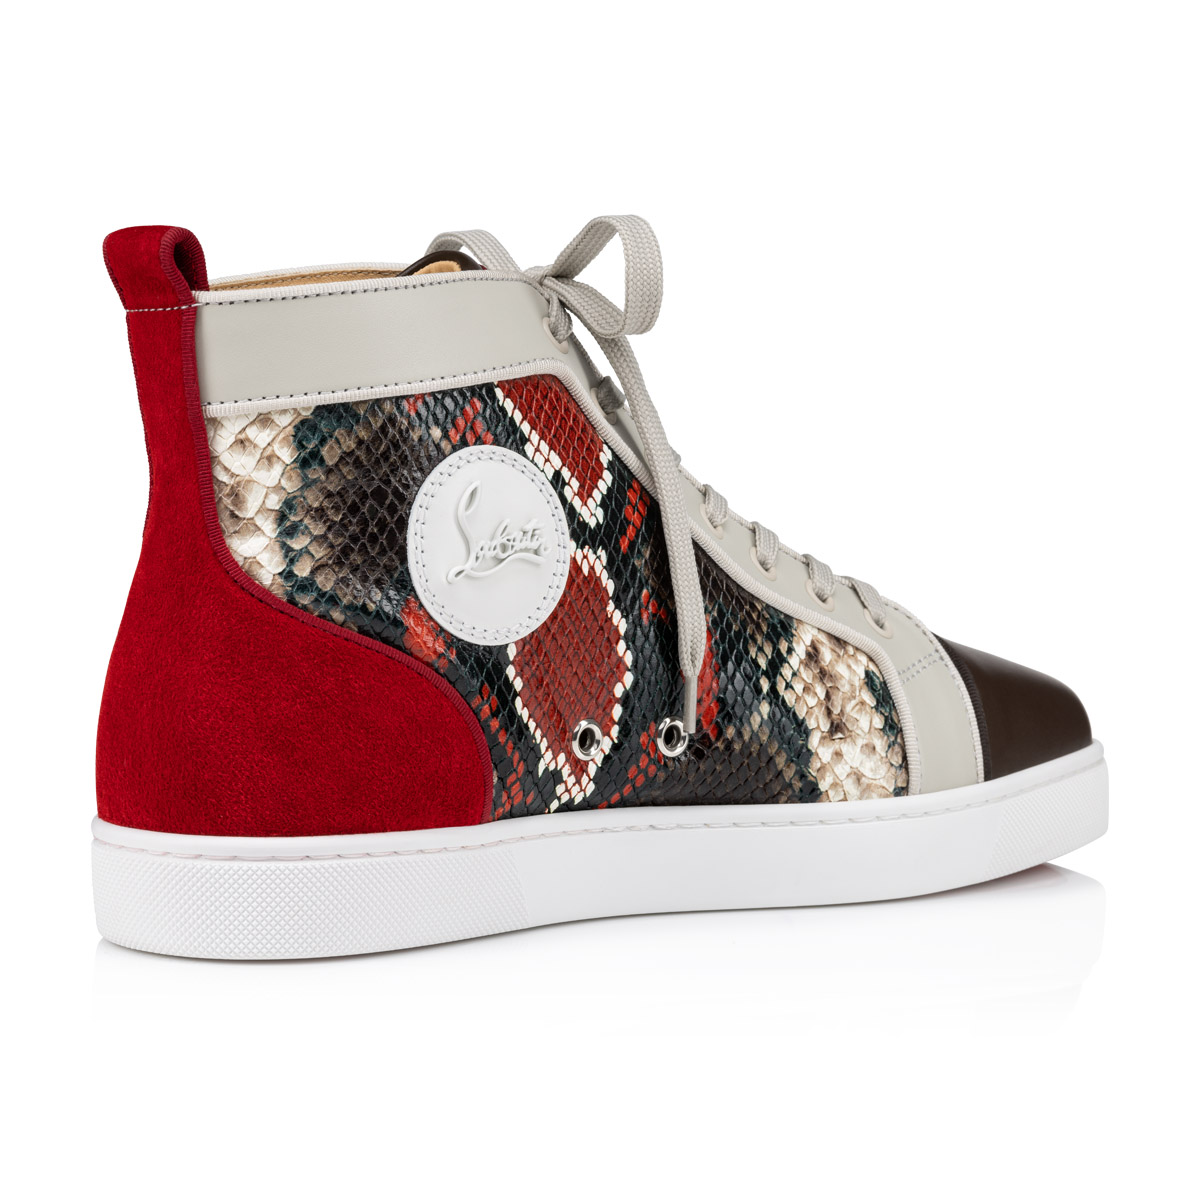 Christian Louboutin Multicolor Leather and Embroidered Velvet Louis  High-Top Sneakers Size 43 Christian Louboutin